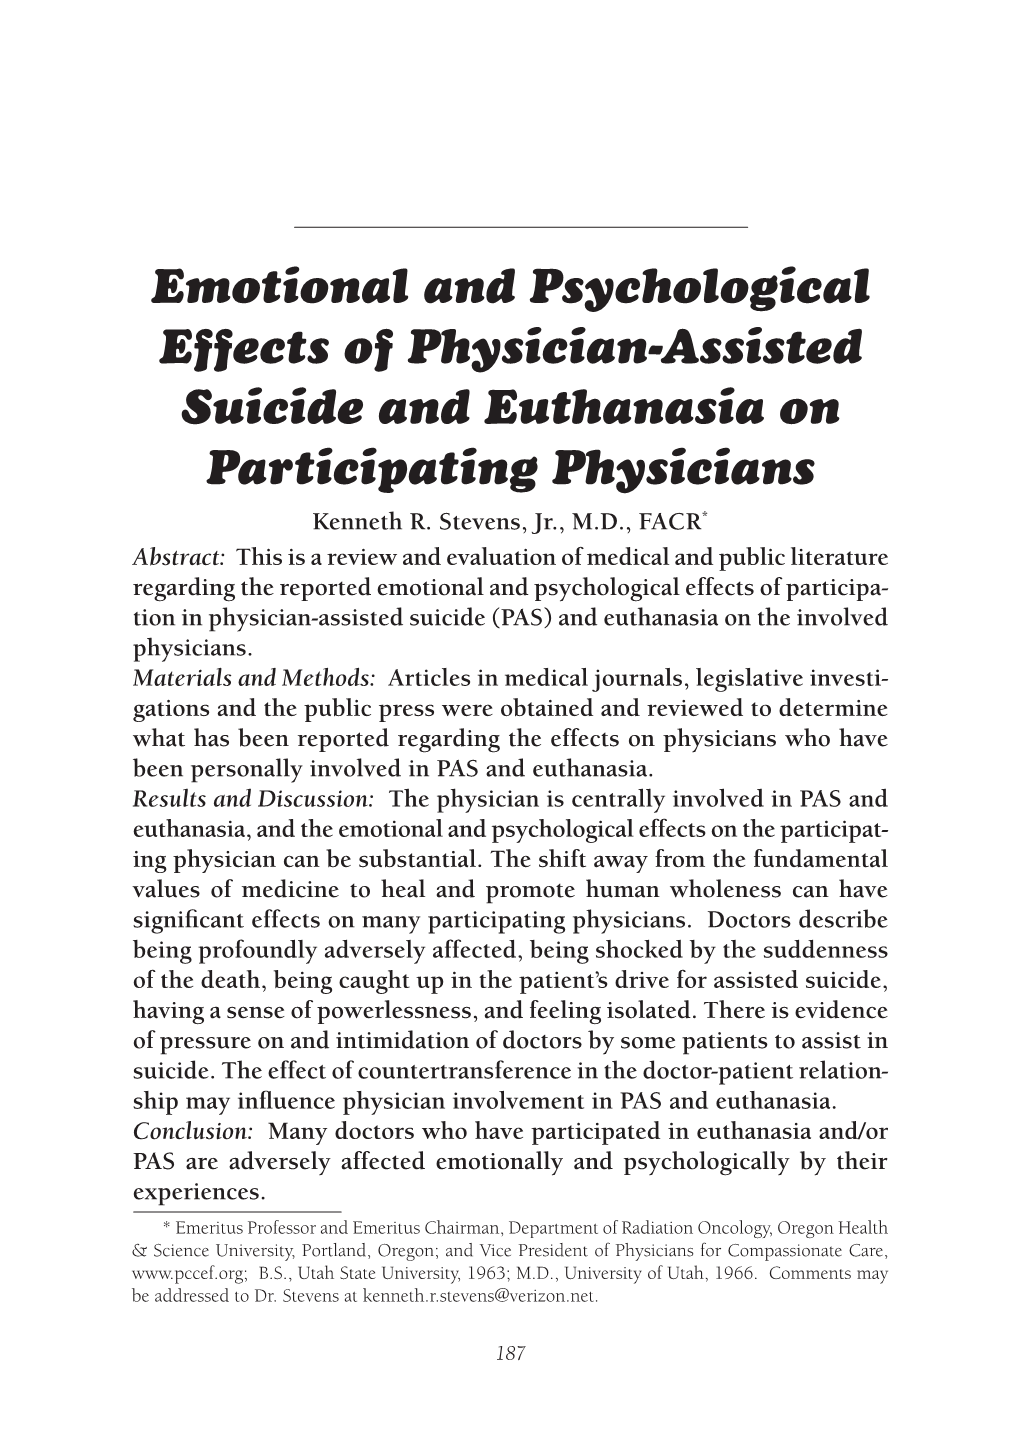 Emotional and Psychological Effects of Physician-Assisted Suicide and Euthanasia on Participating Physicians Kenneth R